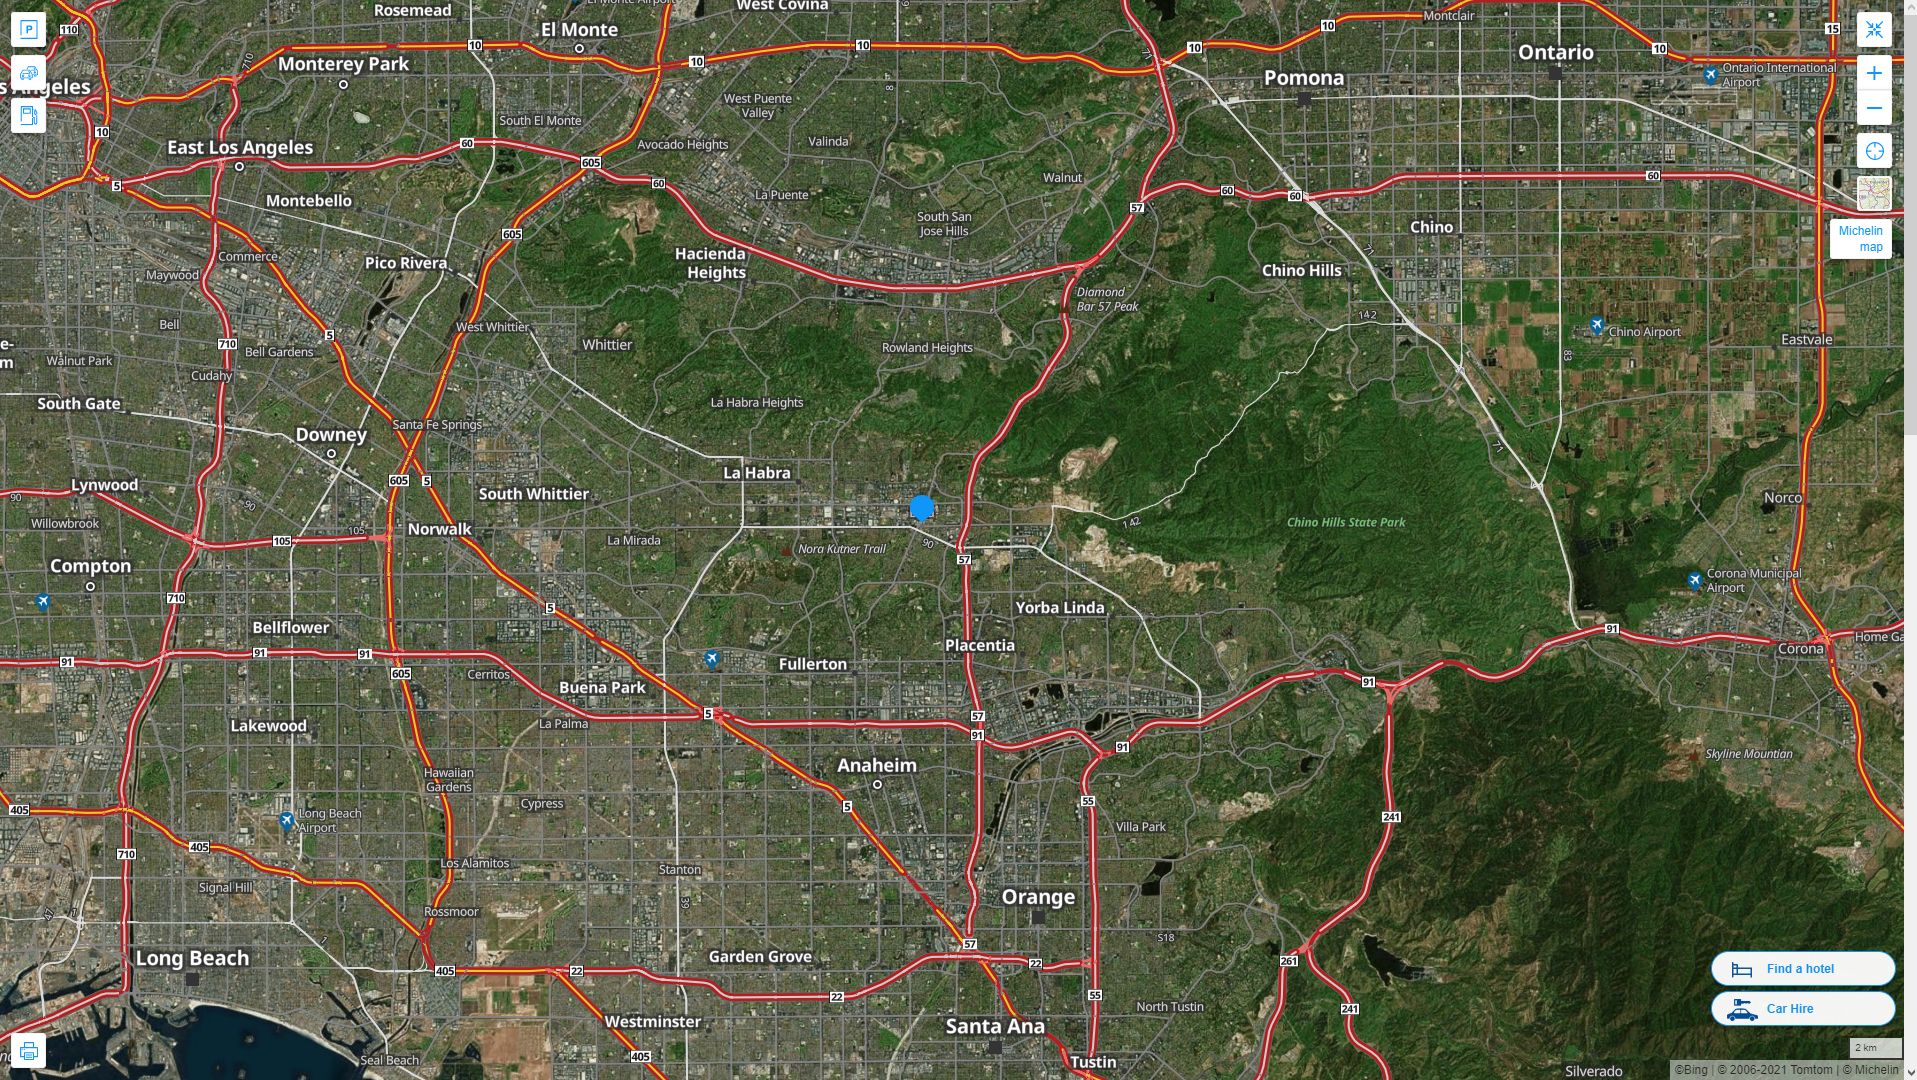 Brea California Highway and Road Map with Satellite View